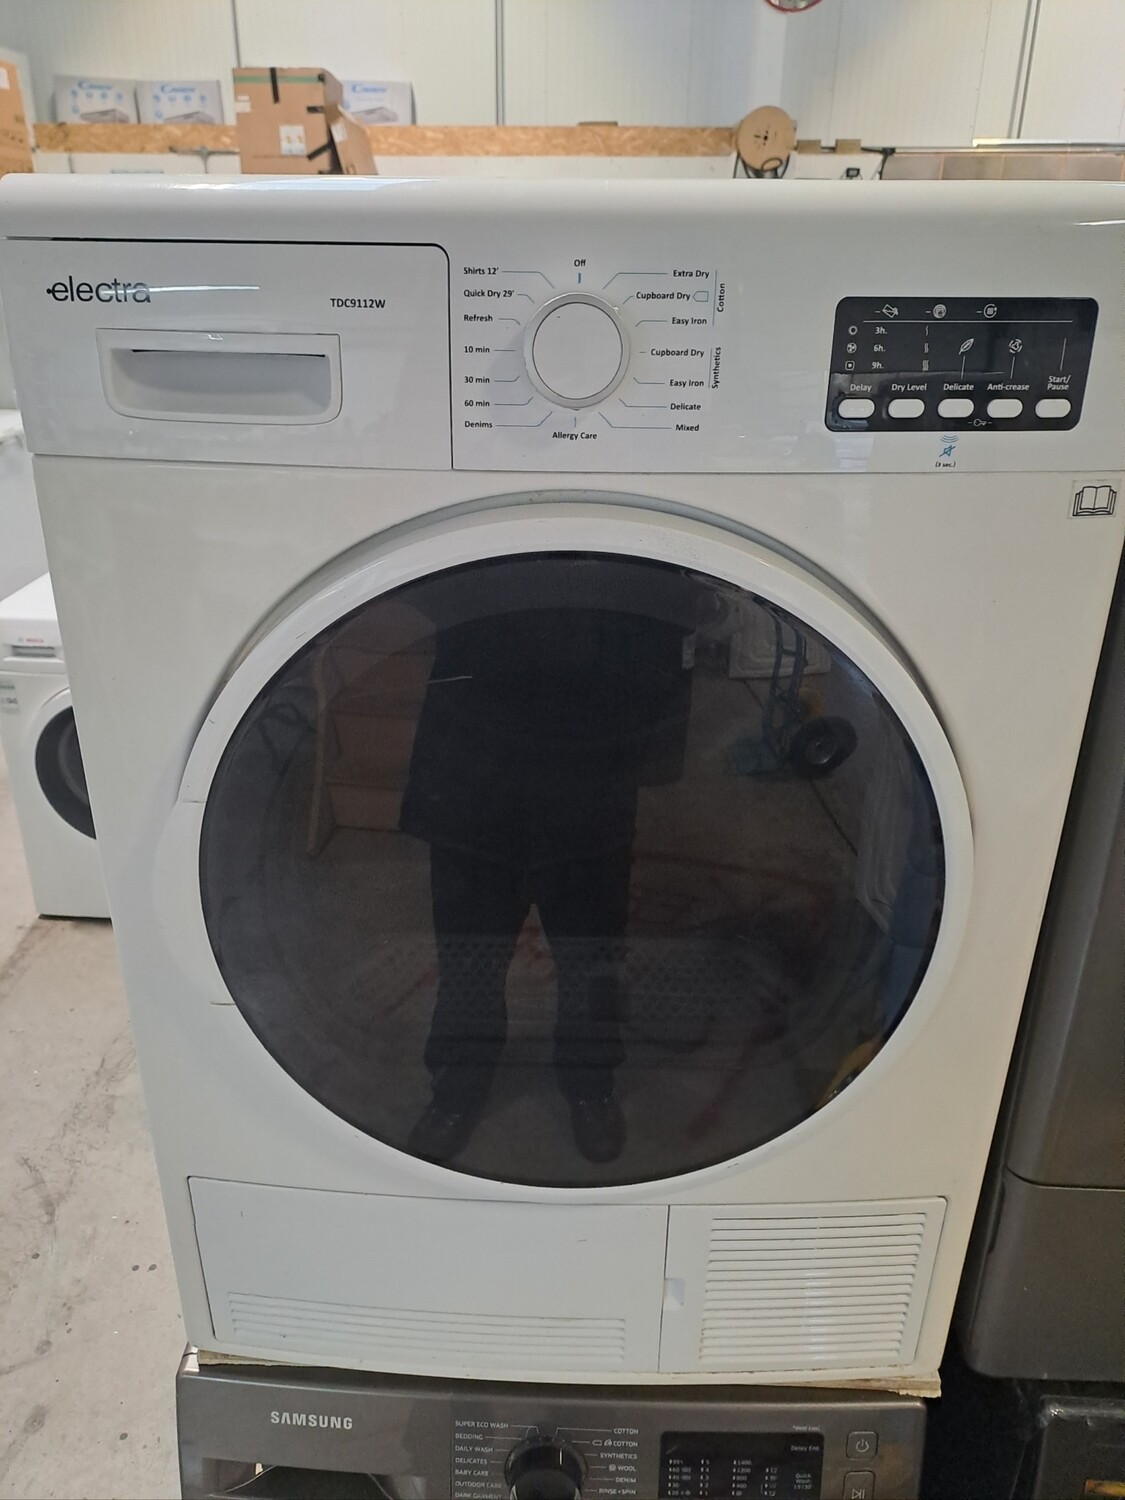 Electra TDC9112W 9Kg Condenser Dryer White Refurbished 6 Months Guarantee. This item is located in our Whitby Road Shop 